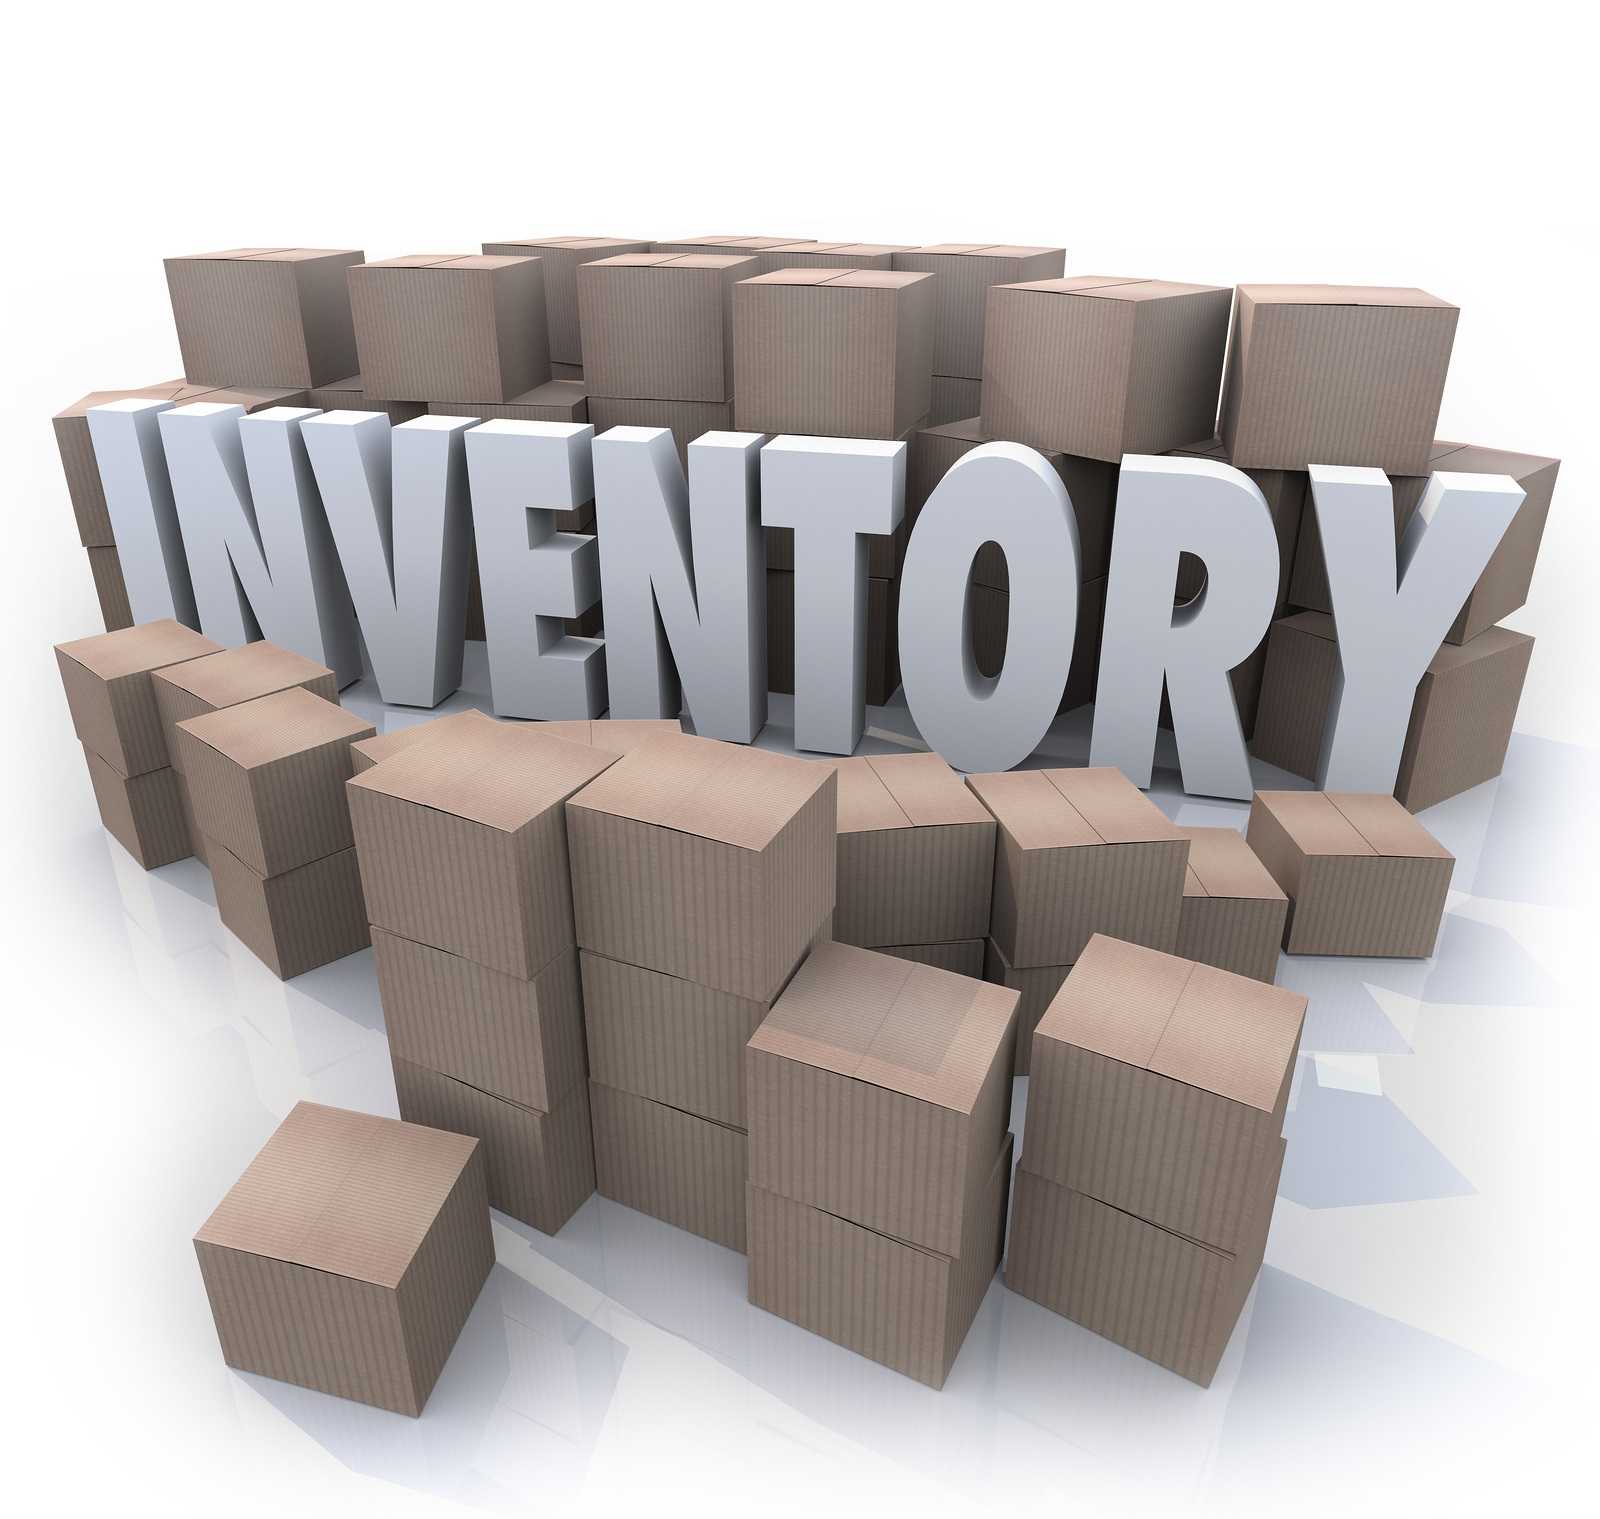 4-quick-tips-to-better-inventory-control-management-national-what